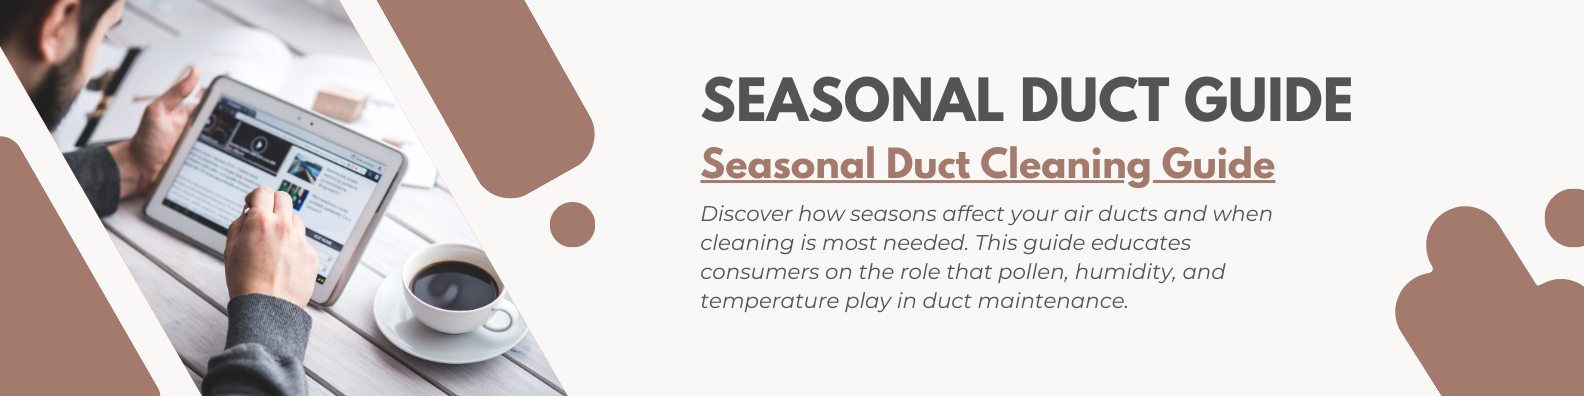 Seasonal Duct Cleaning Guide